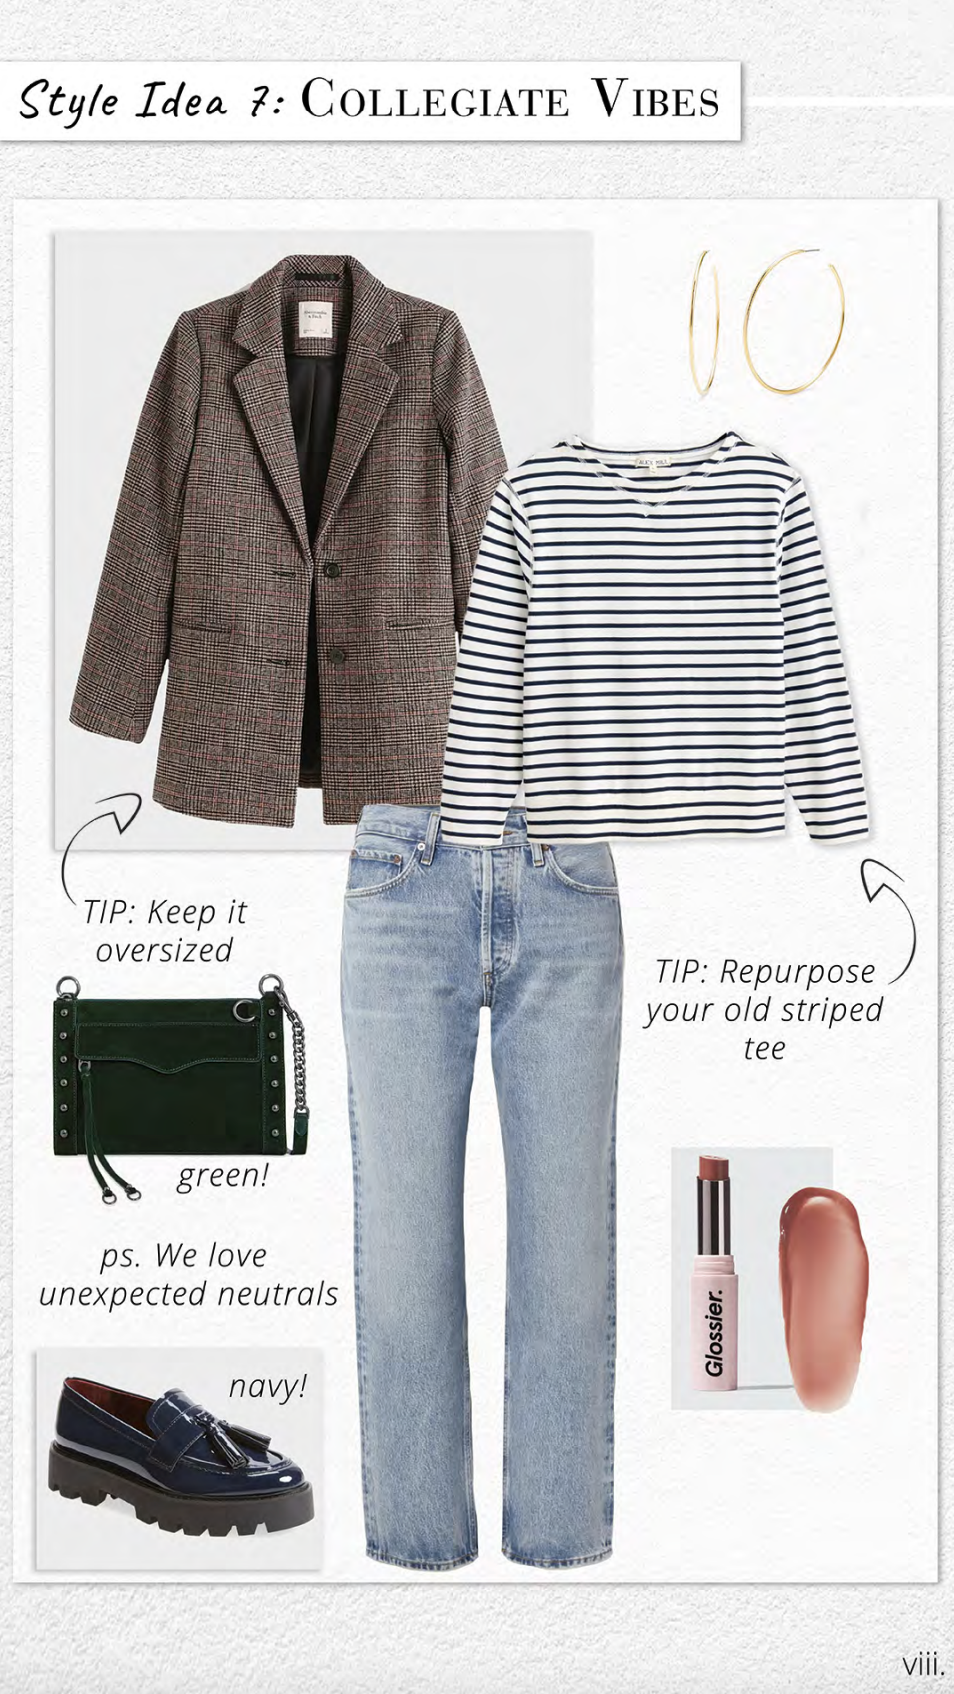 Cool outfit idea for cropped, straight-leg jeans, including a striped tee, oversized blazer, and chunky, lug-sole loafers.